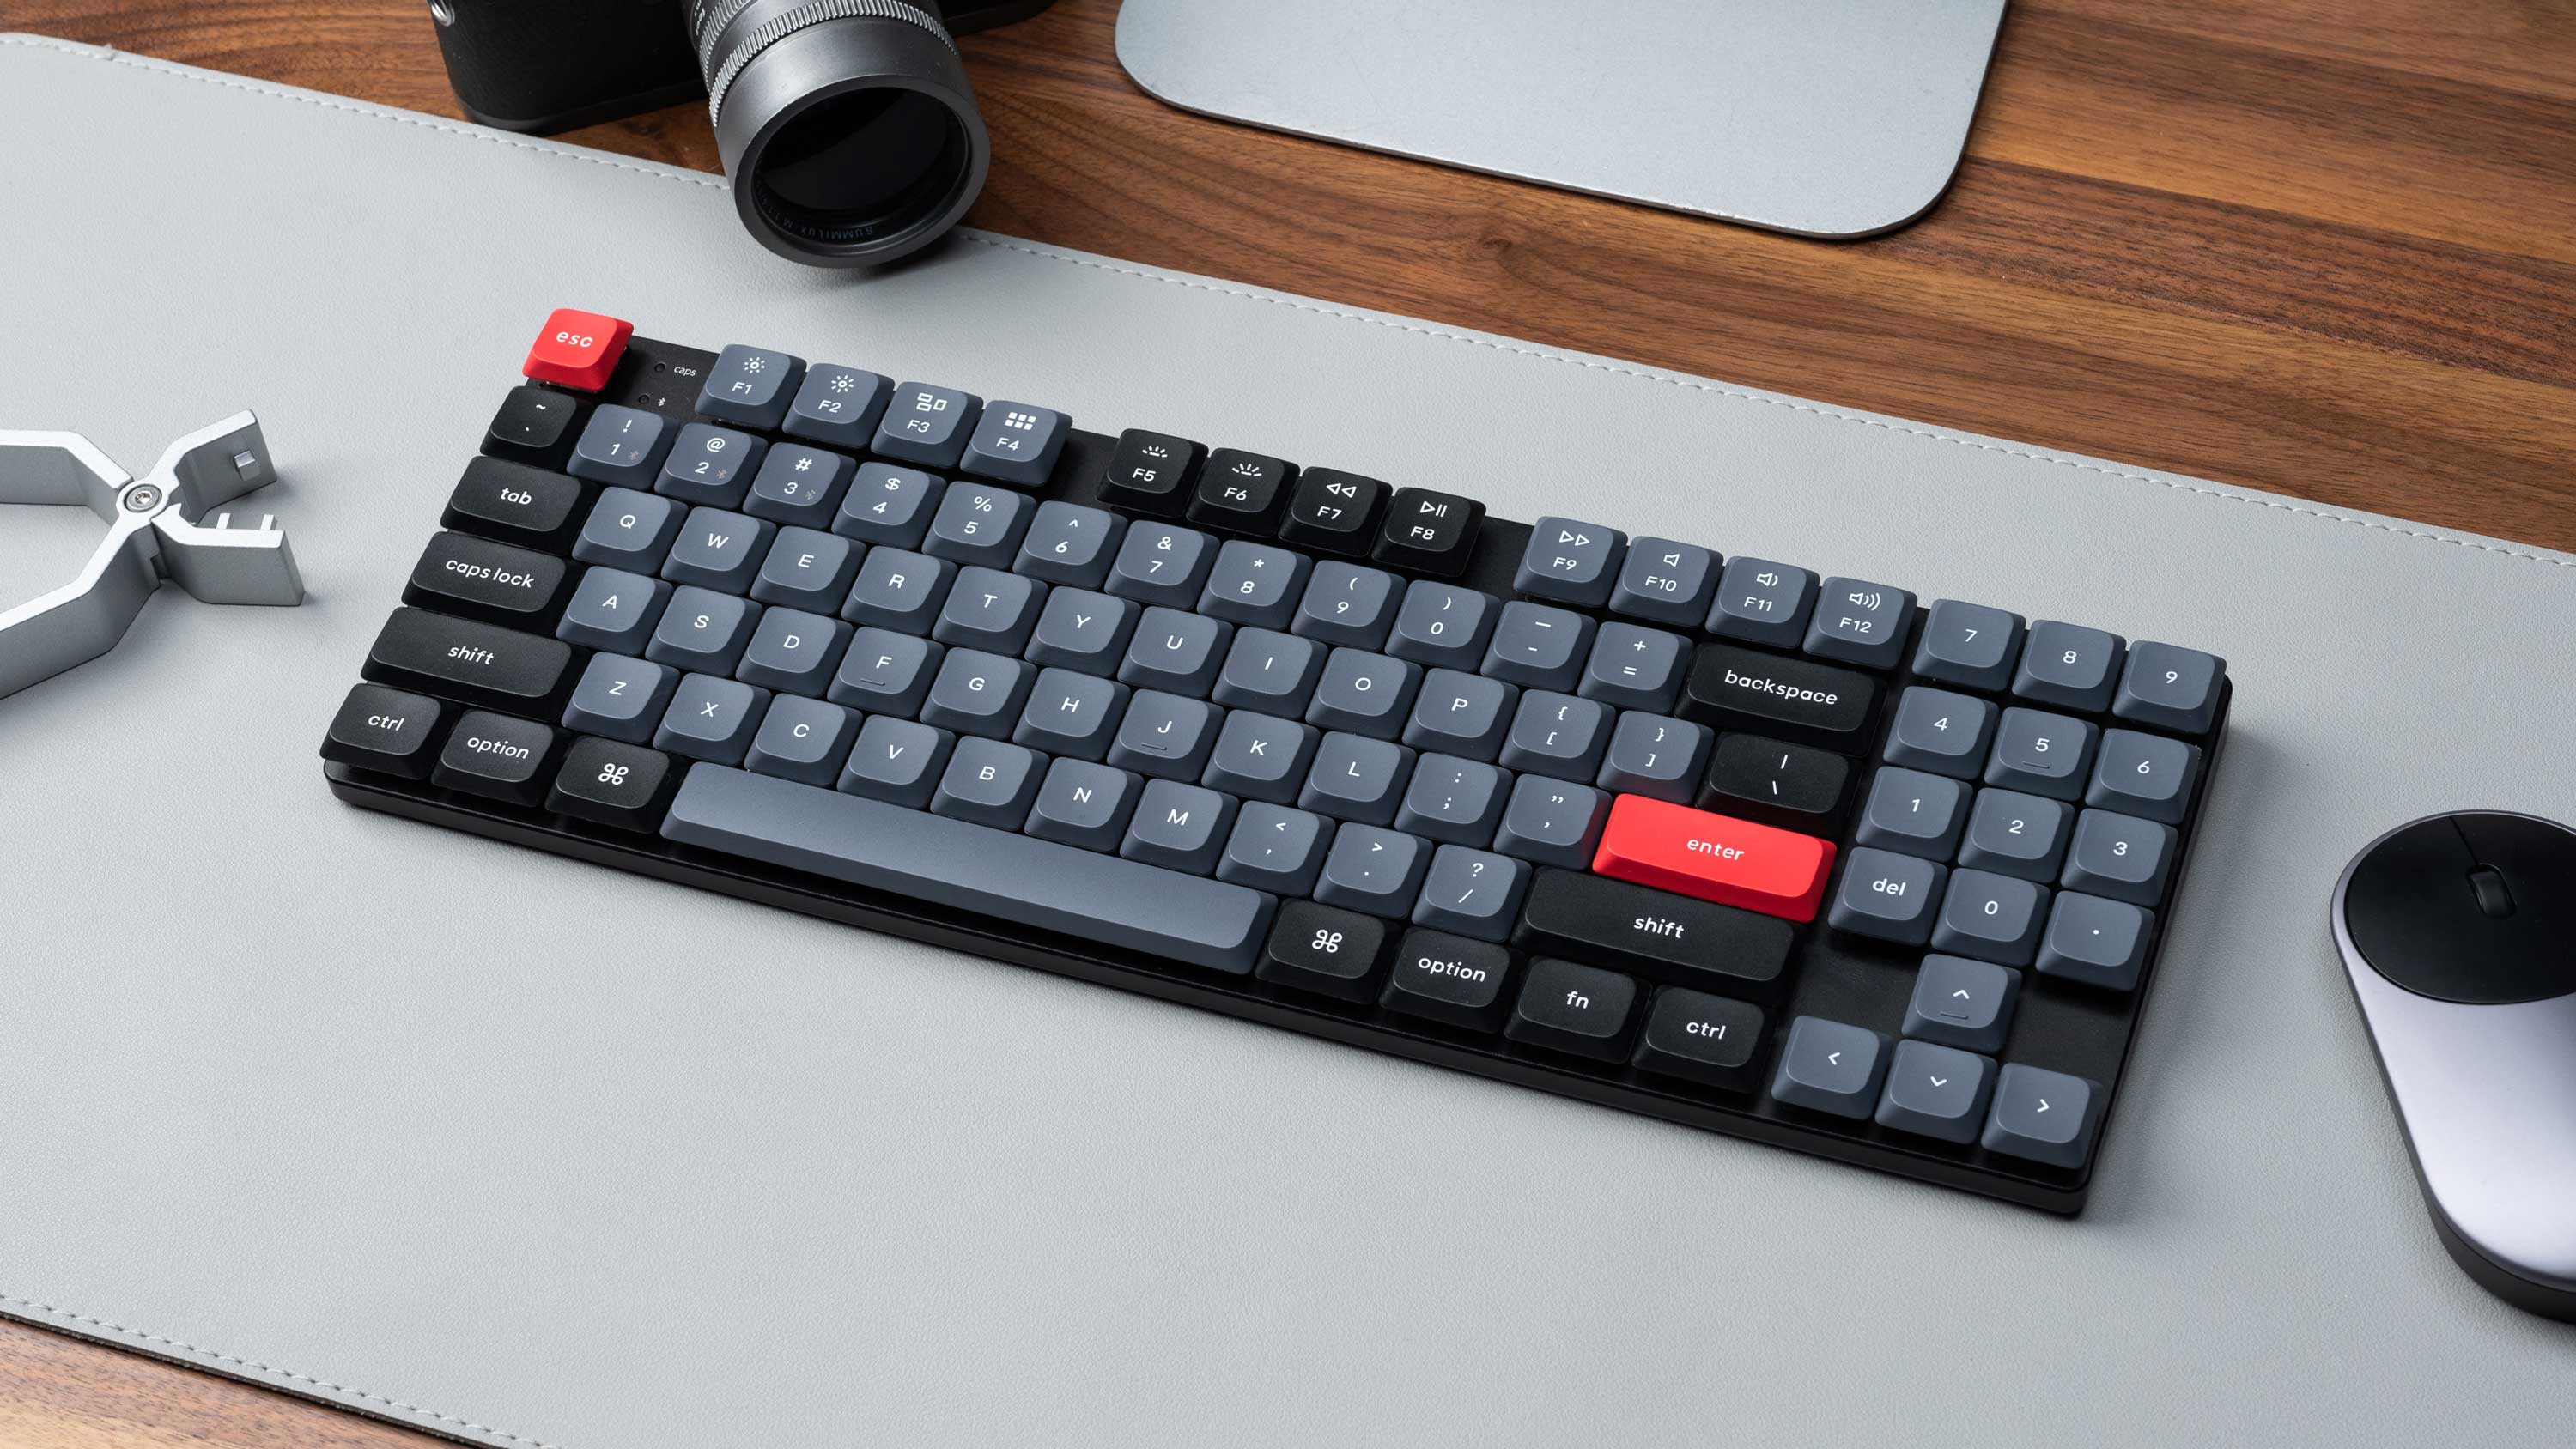 Keychron K1 Pro QMK/VIA Low-Profile Wireless Mechanical Keyboard with an ultra-slim body and hot-swappable